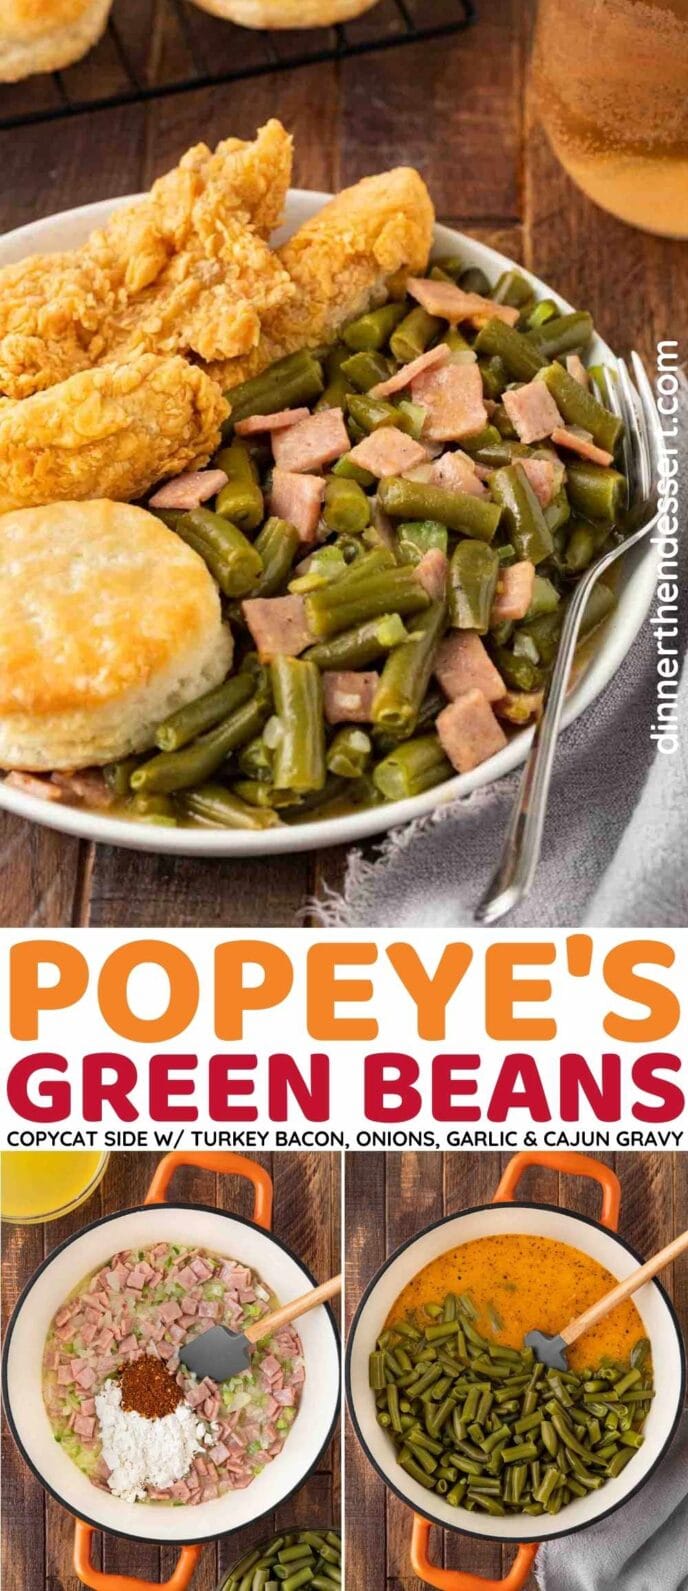 Popeye's Green Beans collage